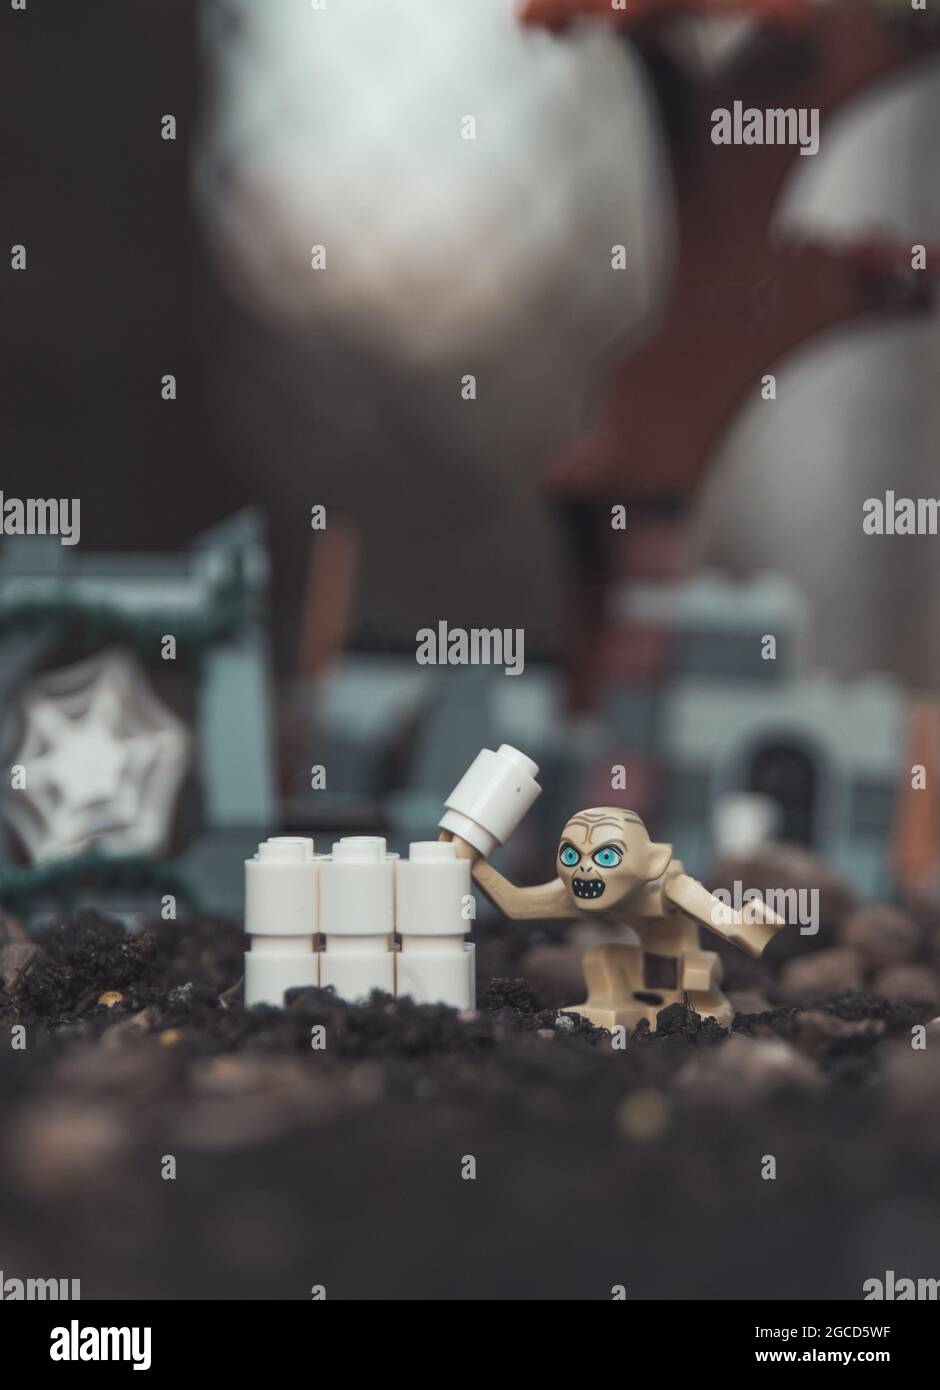 Lego lord of the ring minifigure gollum with toilet paper Stock Photo